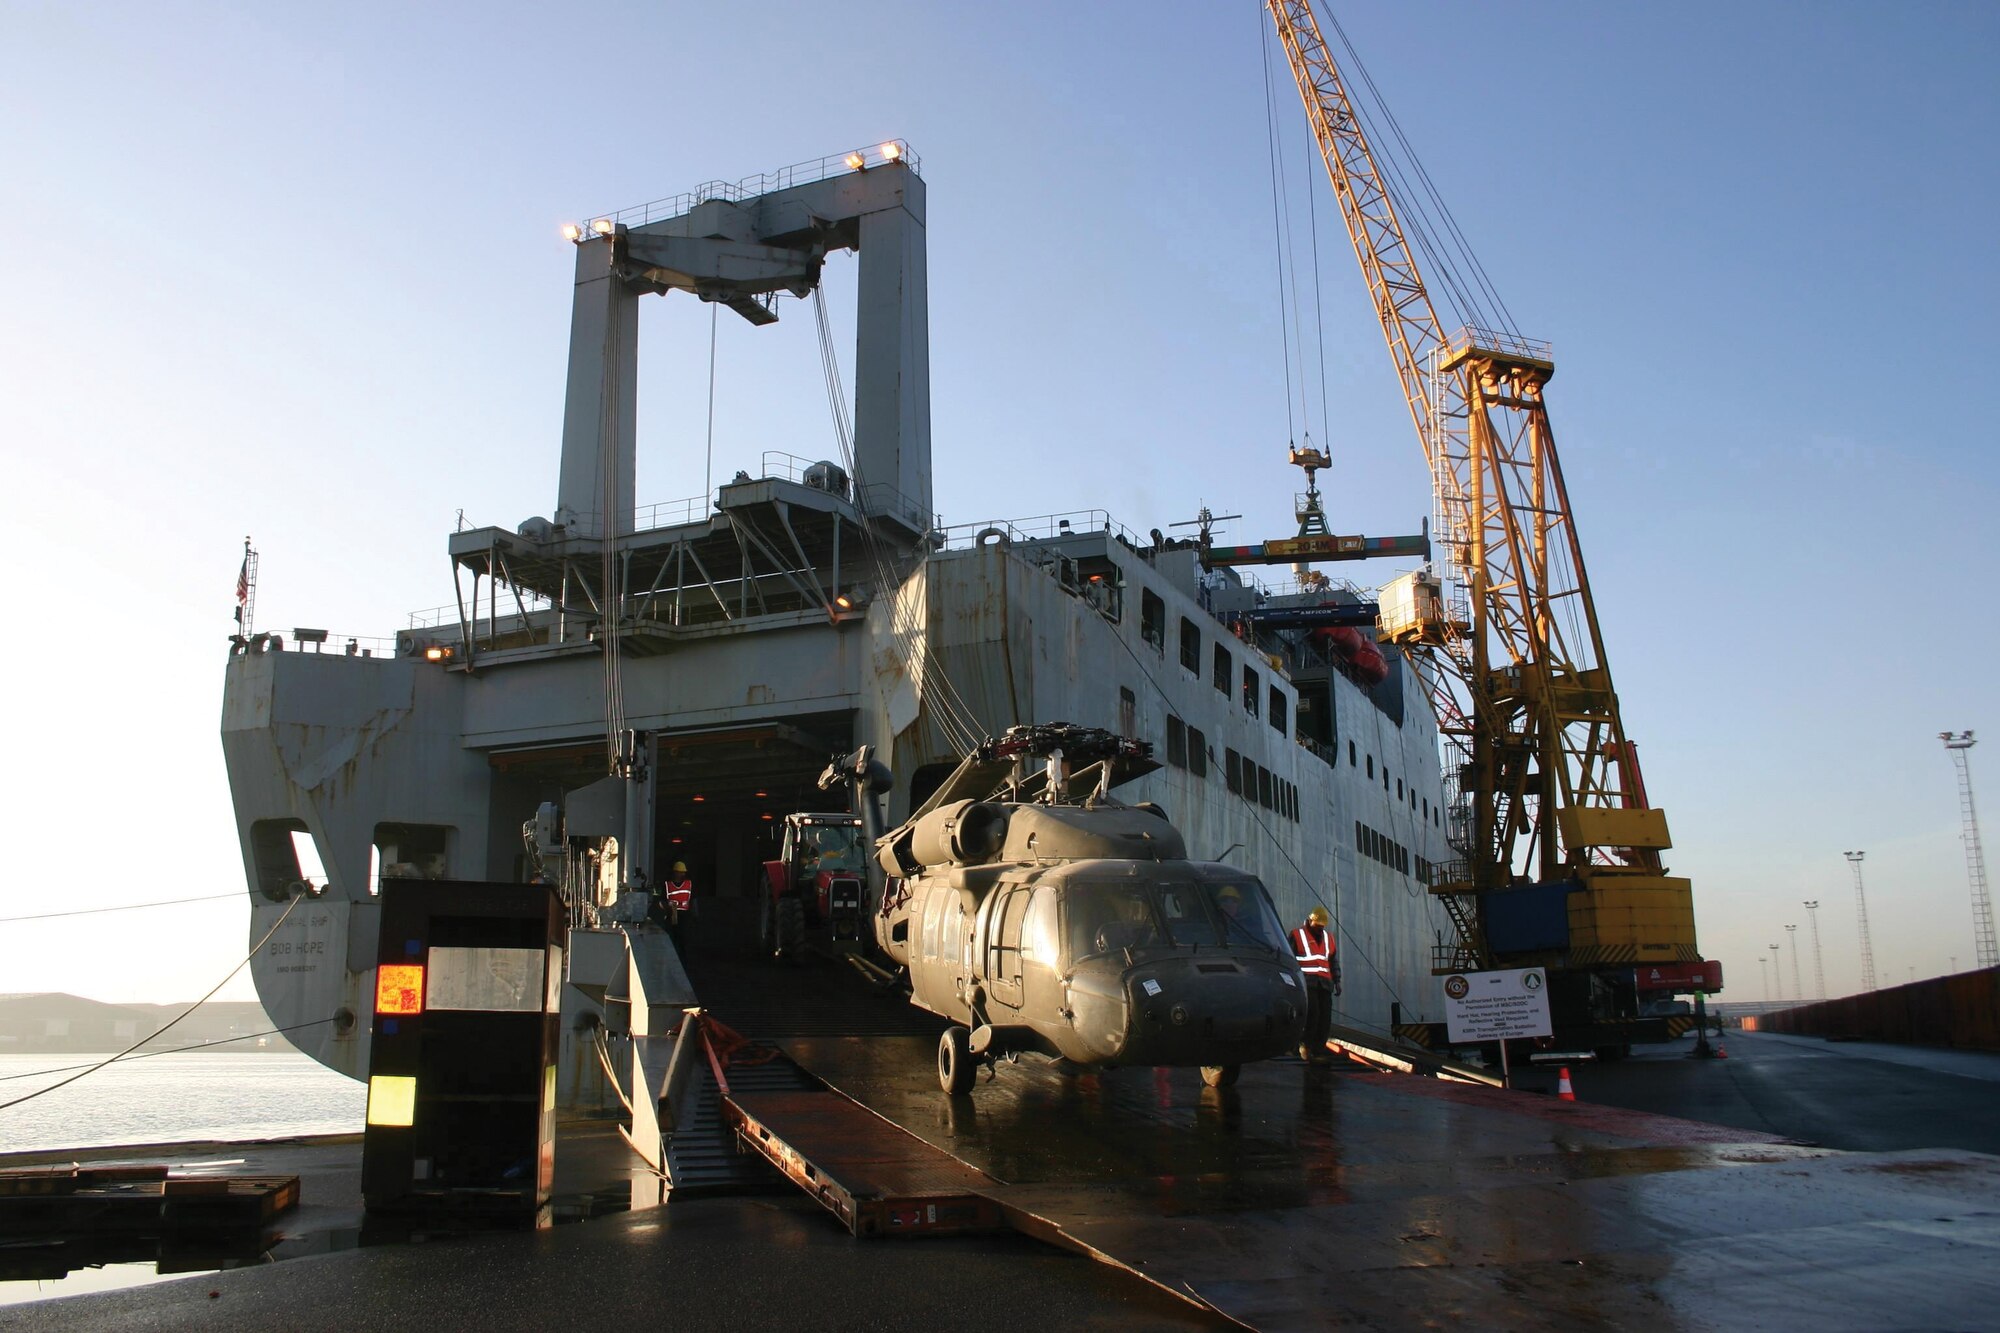 A helicopter is loaded onto USNS Bob Hope in Antwerp, Belgium. The USNS Bob Hope is crewed by civilian mariners under the United States Navy's Military Sealift Command, is used to preposition tanks, trucks and other supplies needed to support an Army heavy brigade. (U.S. Navy photo)